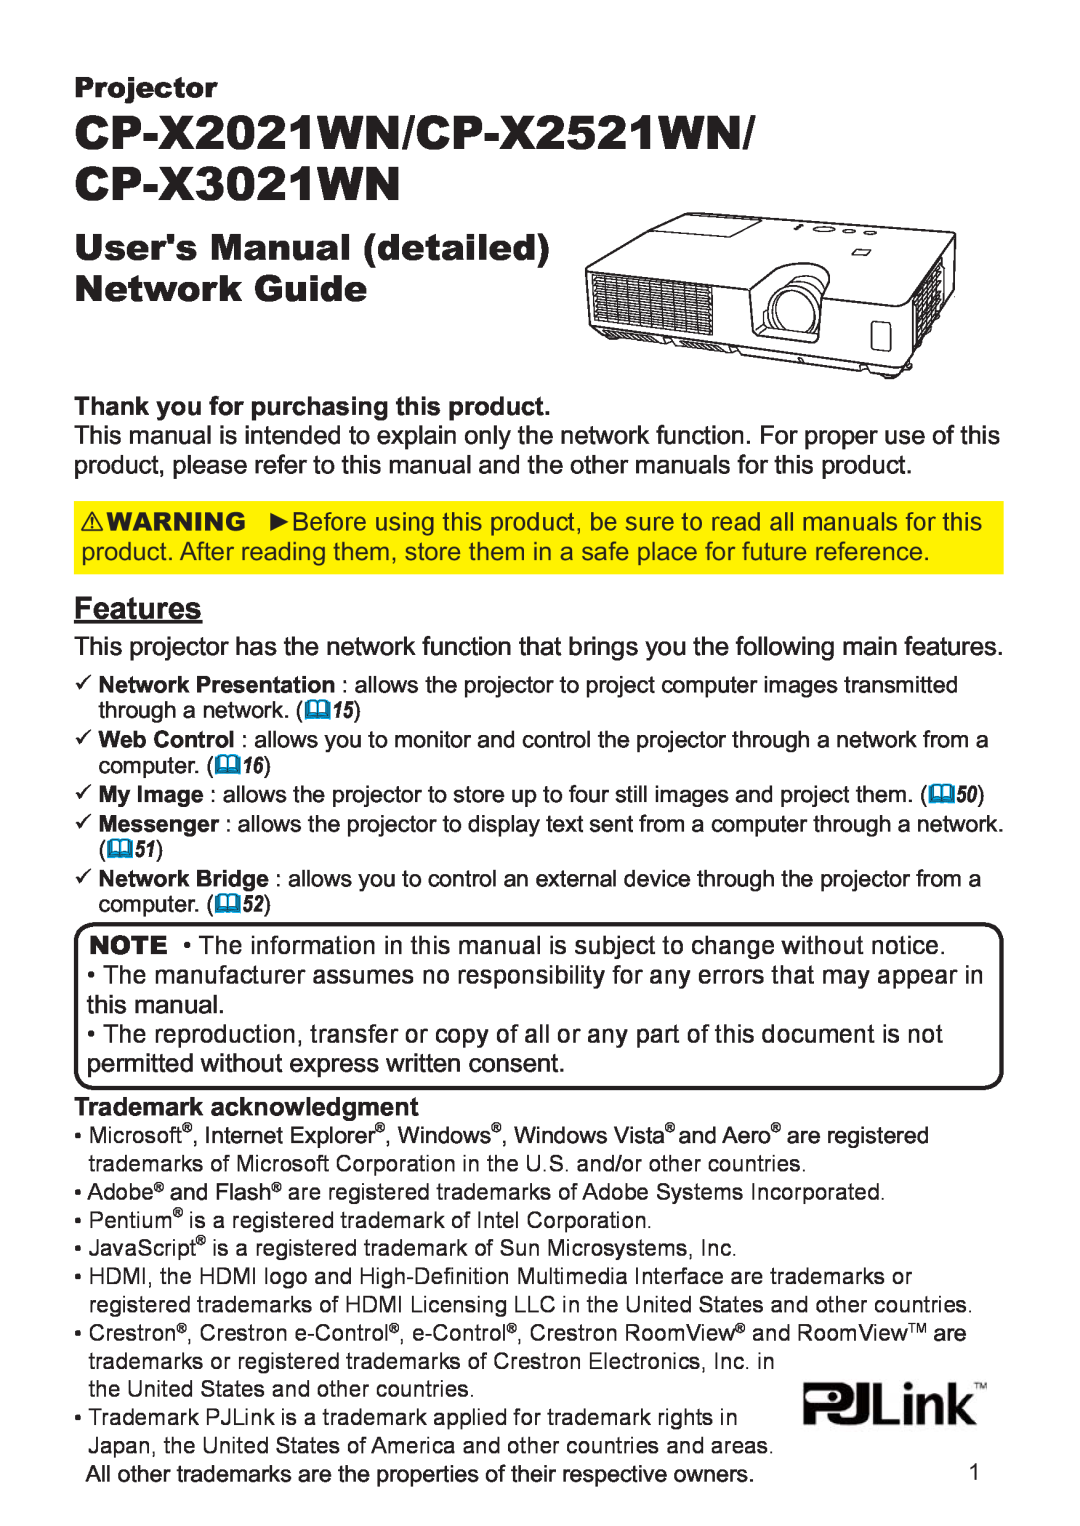 Hitachi Users Manual detailed Network Guide, CP-X2021WN/CP-X2521WN CP-X3021WN, Projector, Trademark acknowledgment 